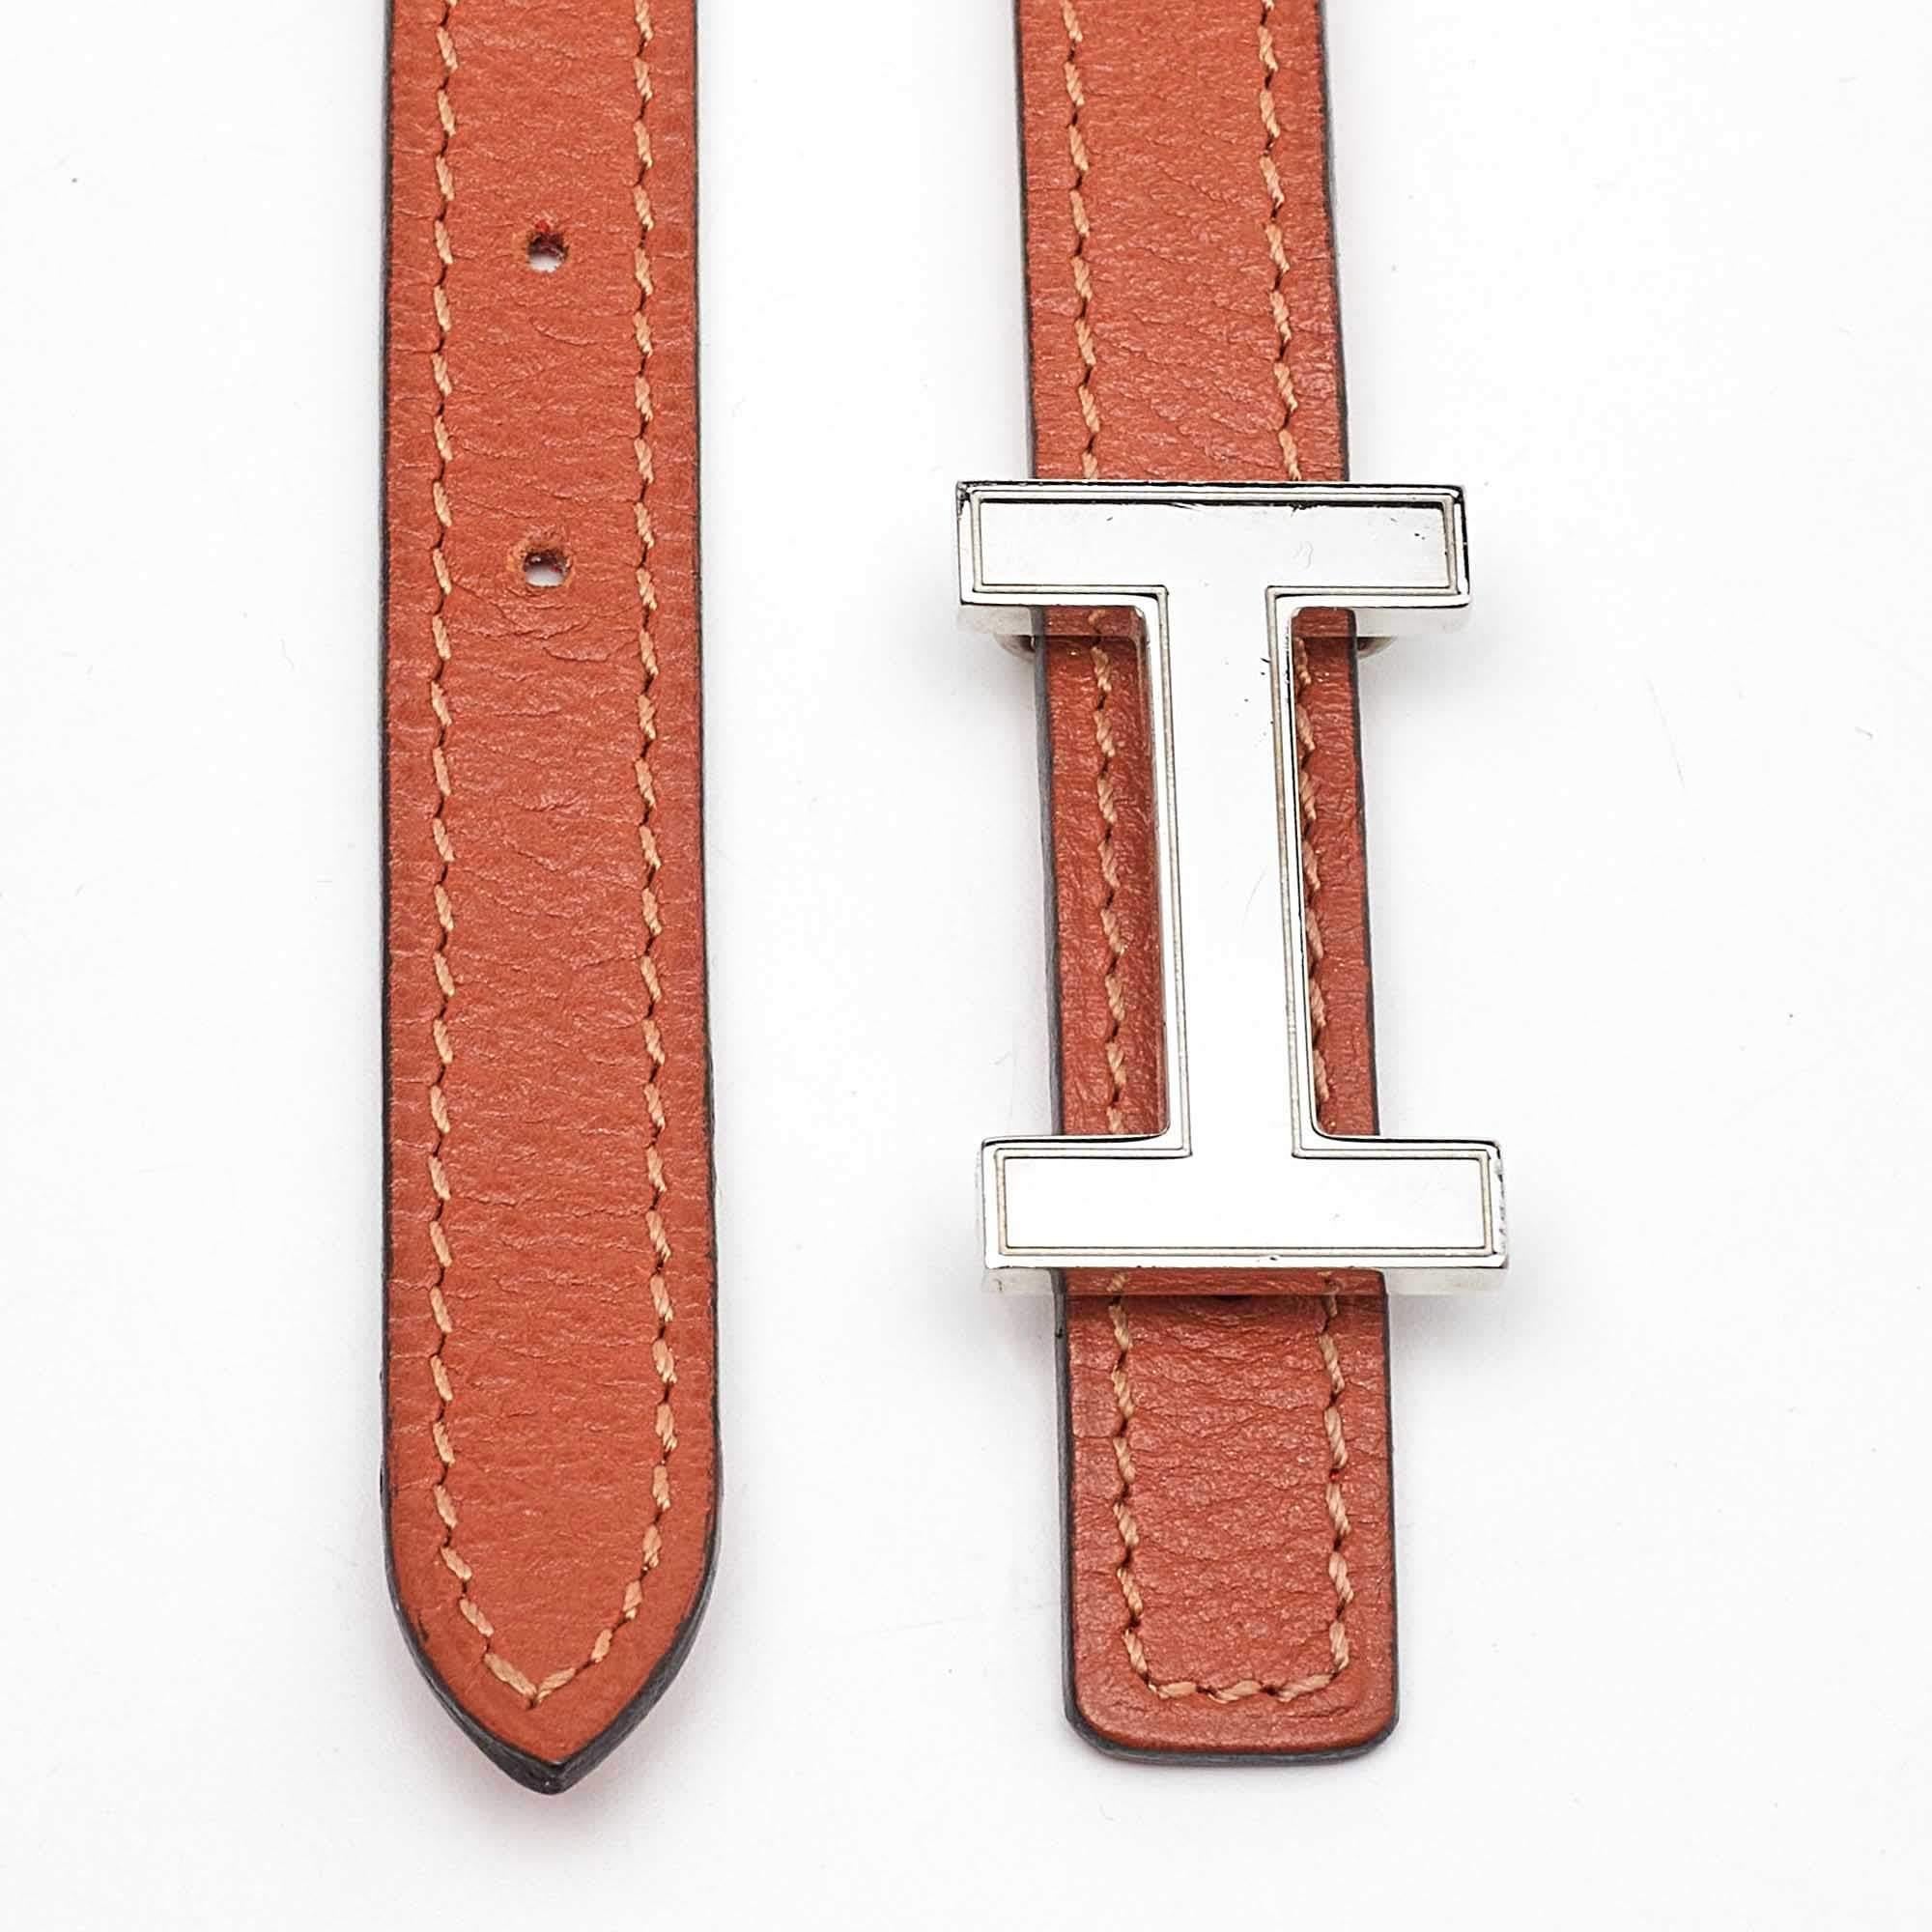 Discover effortless elegance with this Hermes belt. Merging artisanal craftsmanship and timeless design, this accessory redefines the art of refinement, a symbol of impeccable taste and style.

